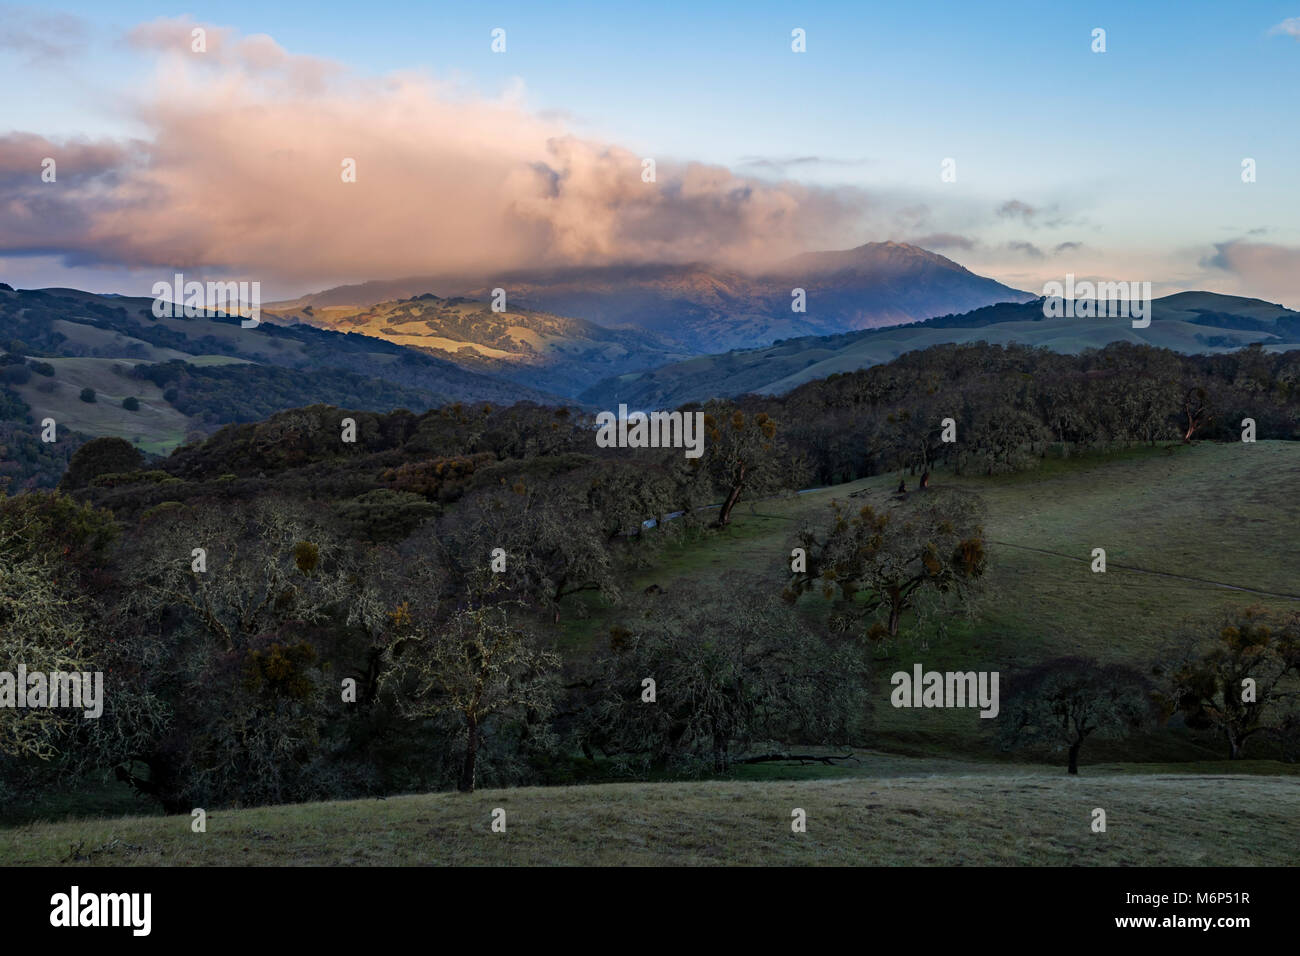 Winter storm clouds obscure the peak of Mount Diablo as they pass over the Morgan Territory Preserve in Northern California's eastern Contra Costa Cou Stock Photo